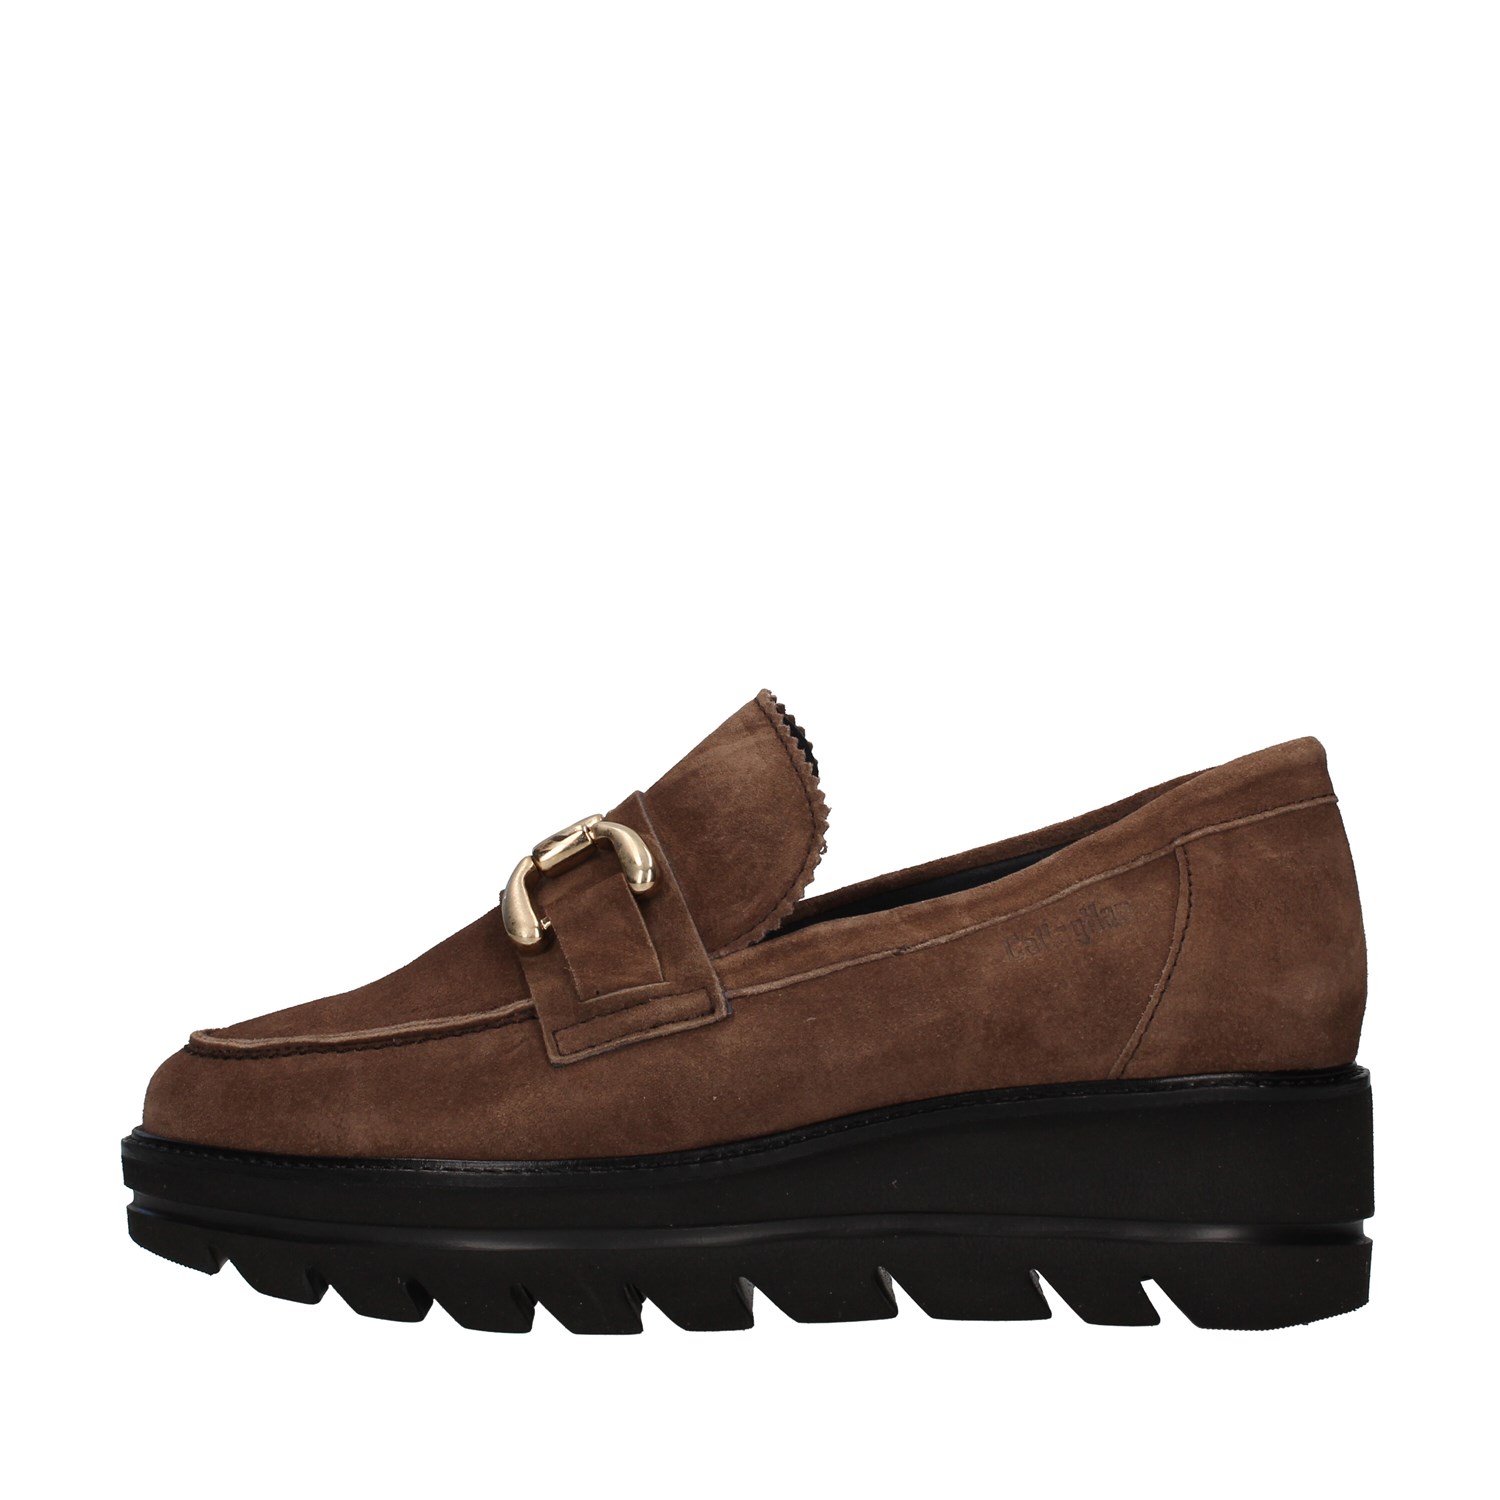 Callaghan 14854 BROWN Shoes Woman